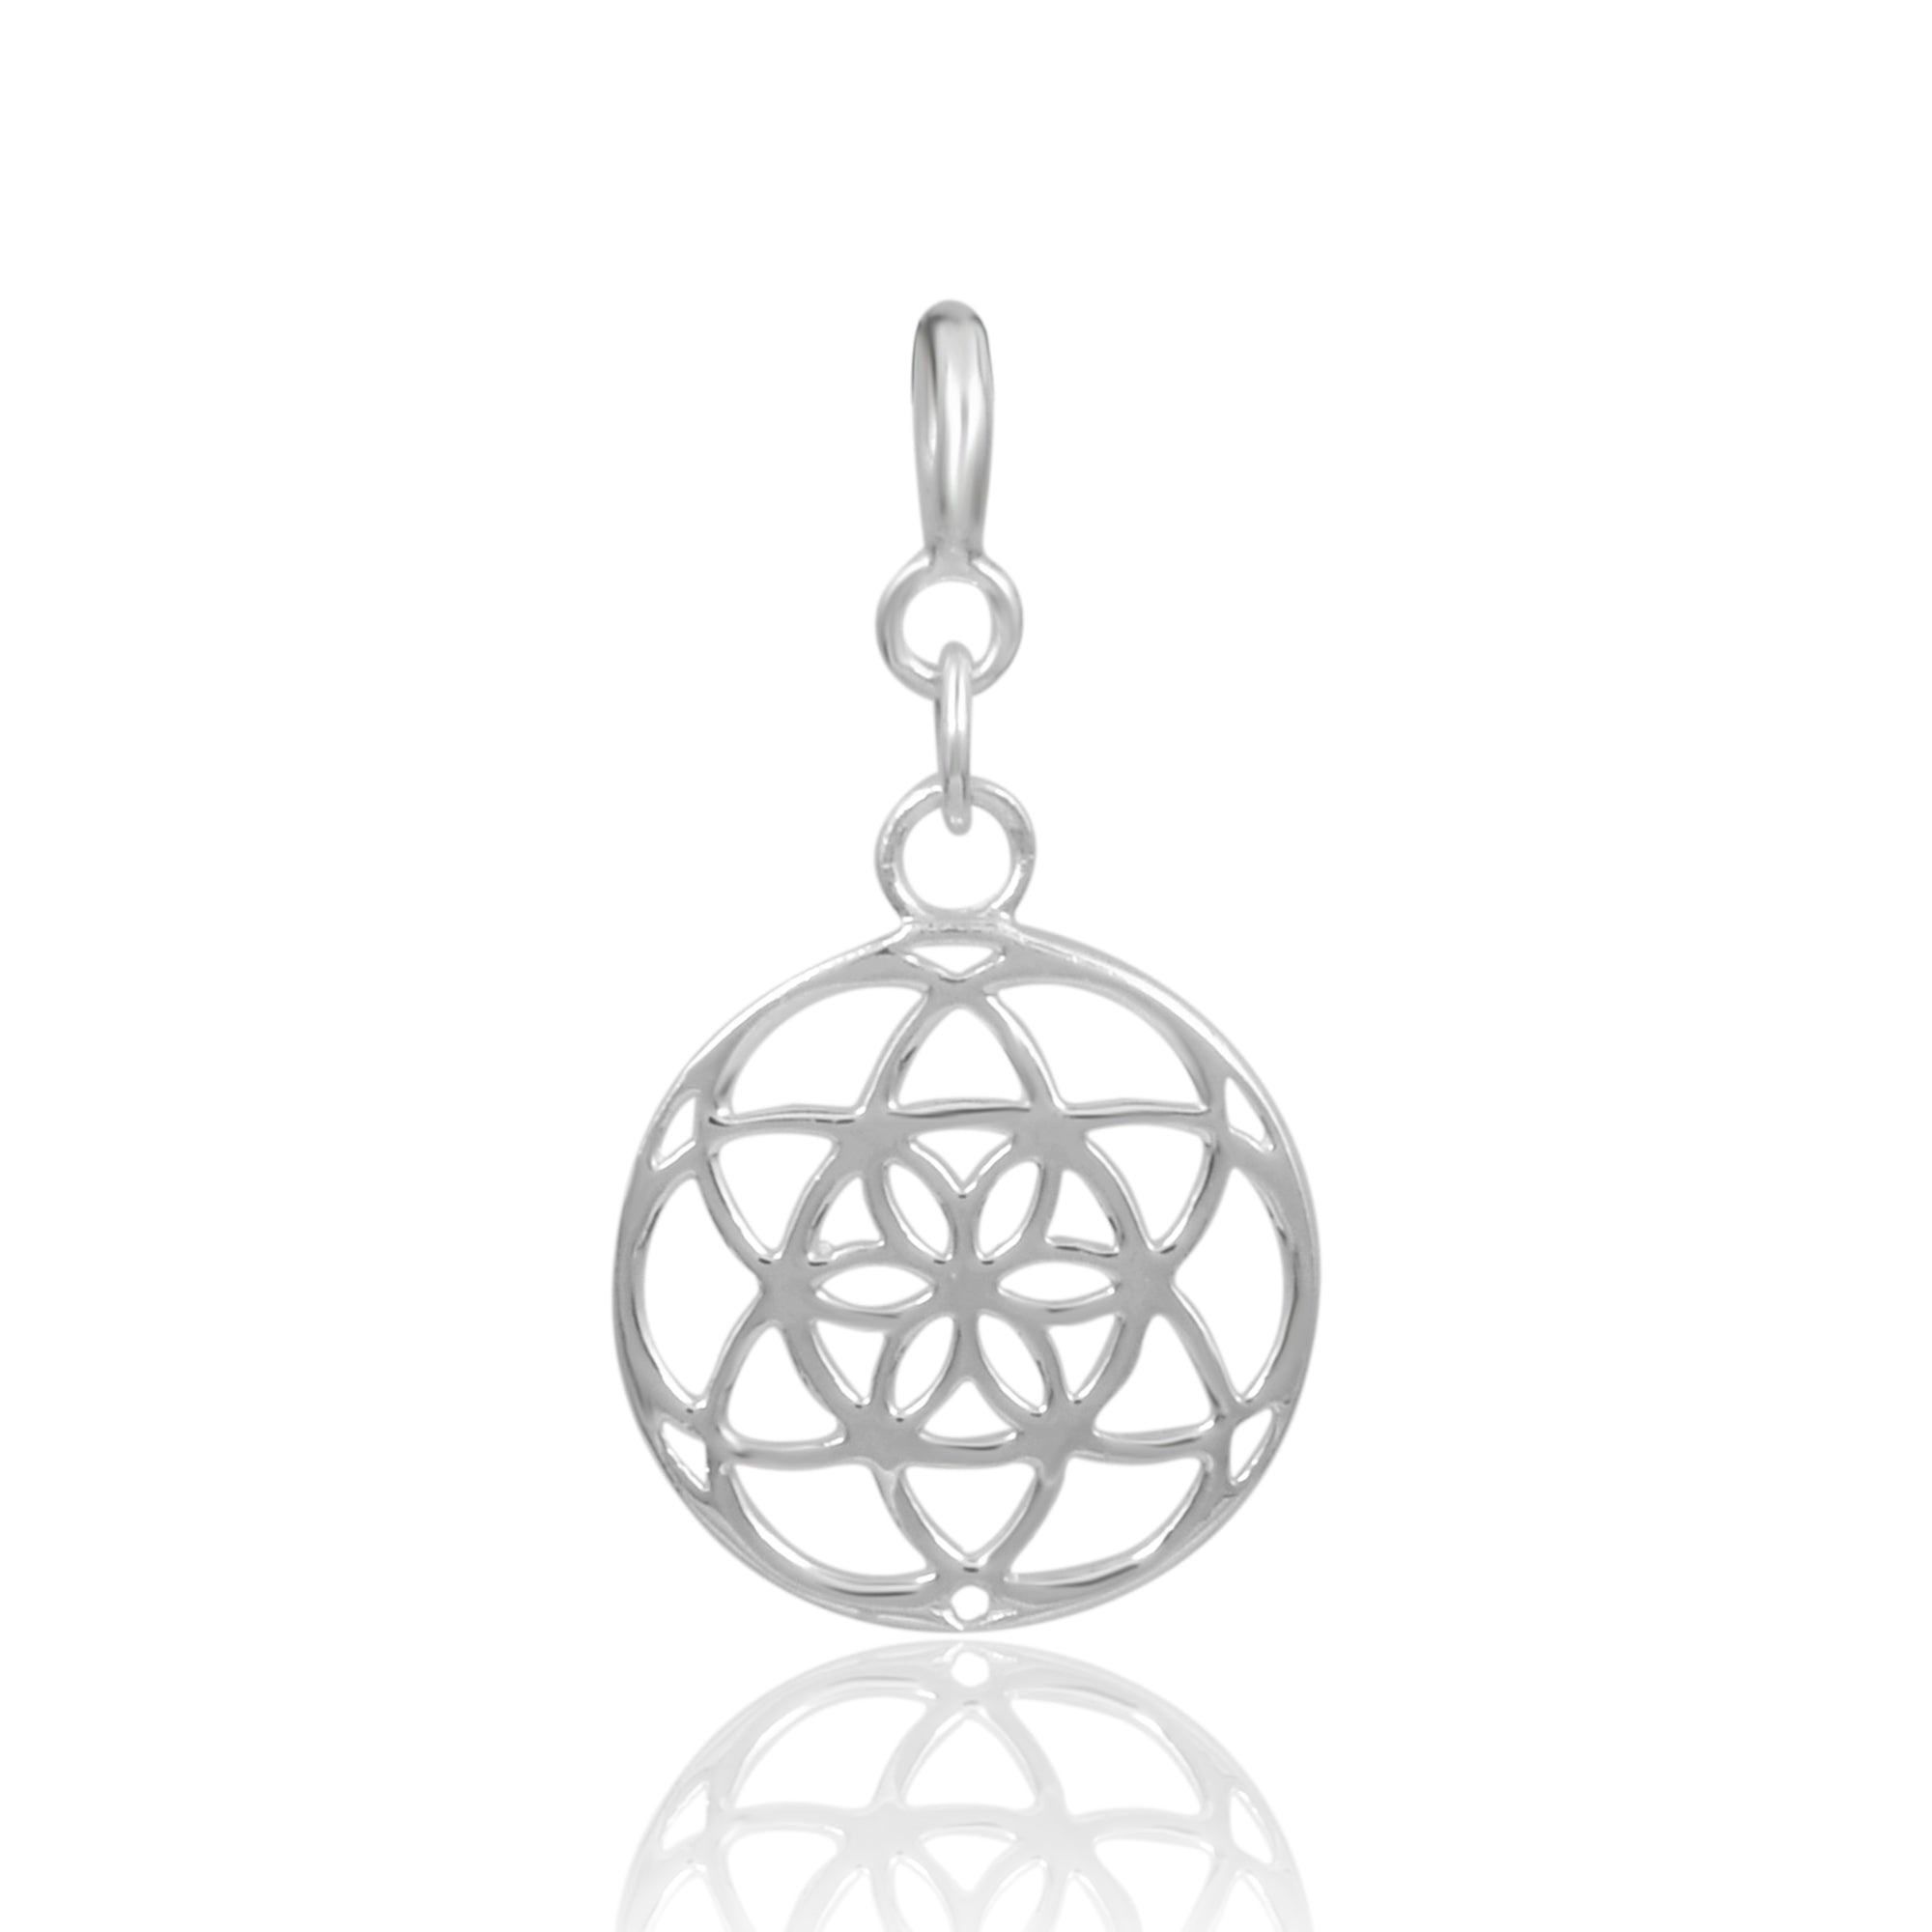 Seed of Life Charm - Silver